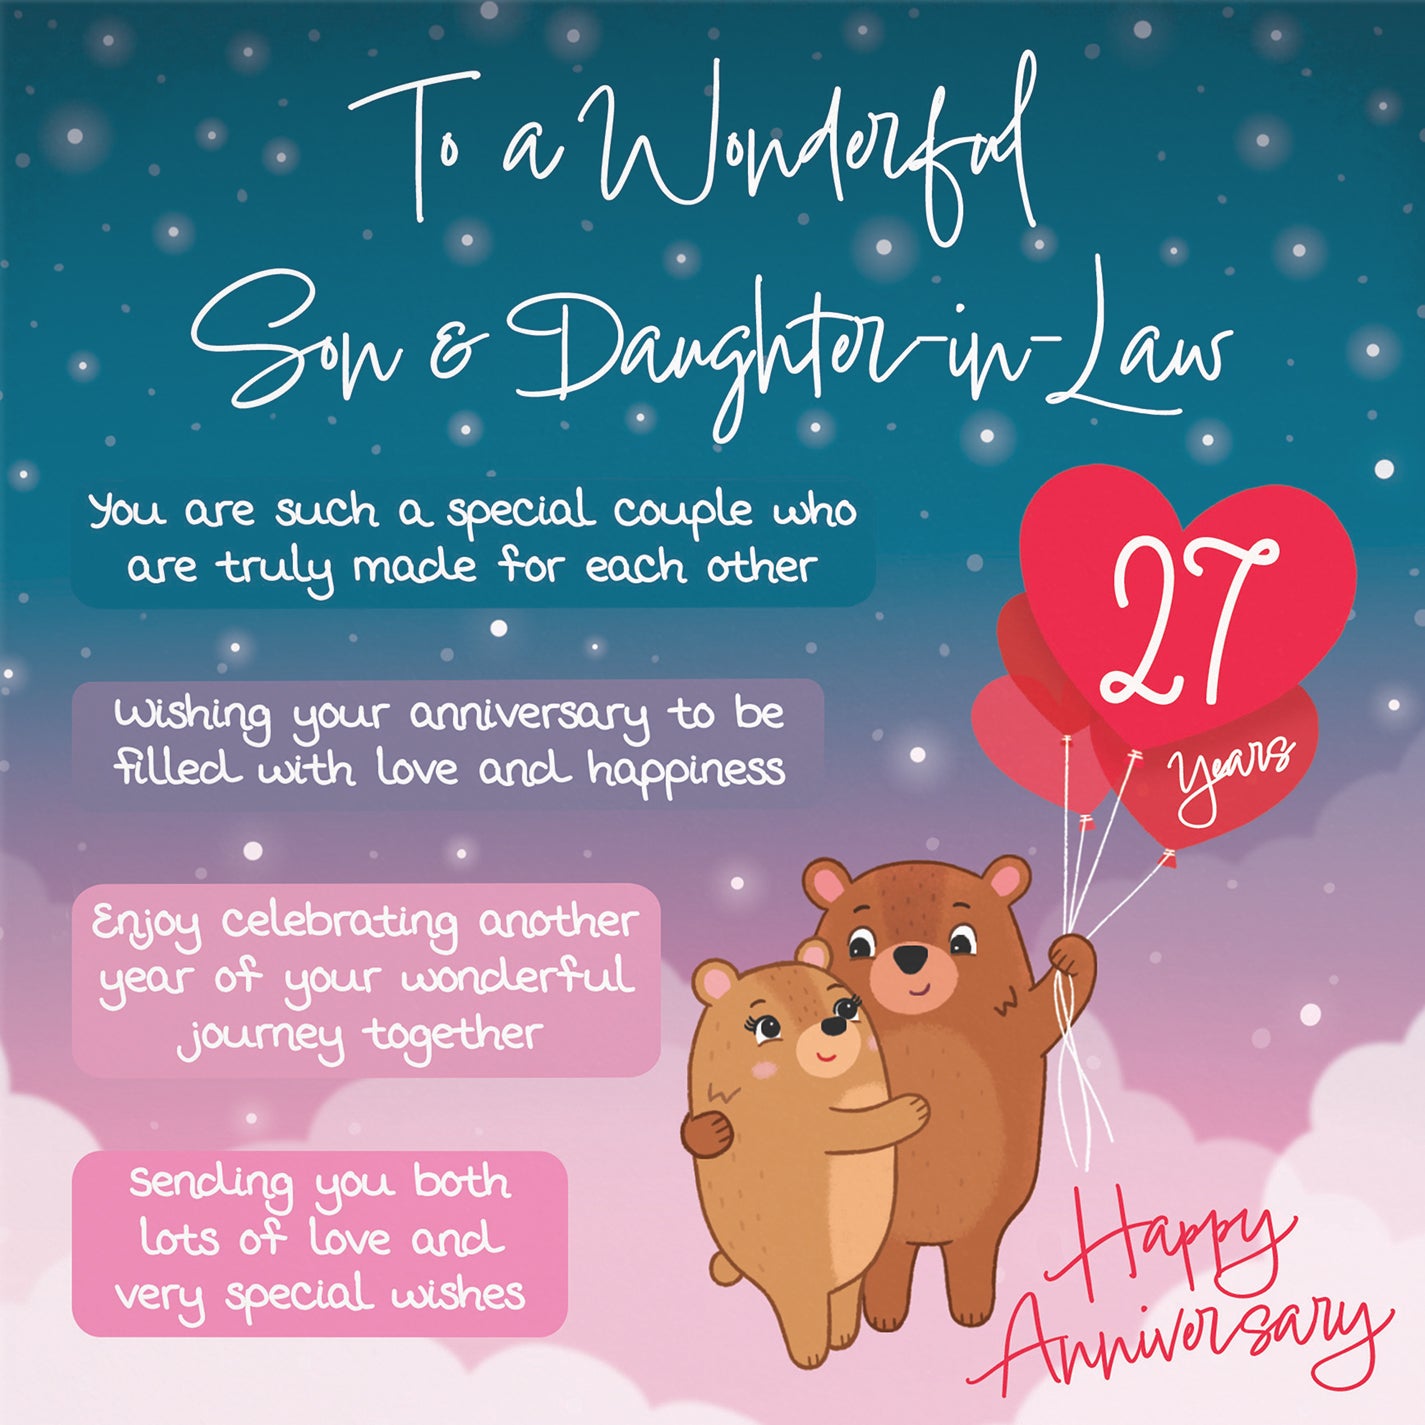 Son And Daughter In Law 27th Anniversary Card Starry Night Cute Bears